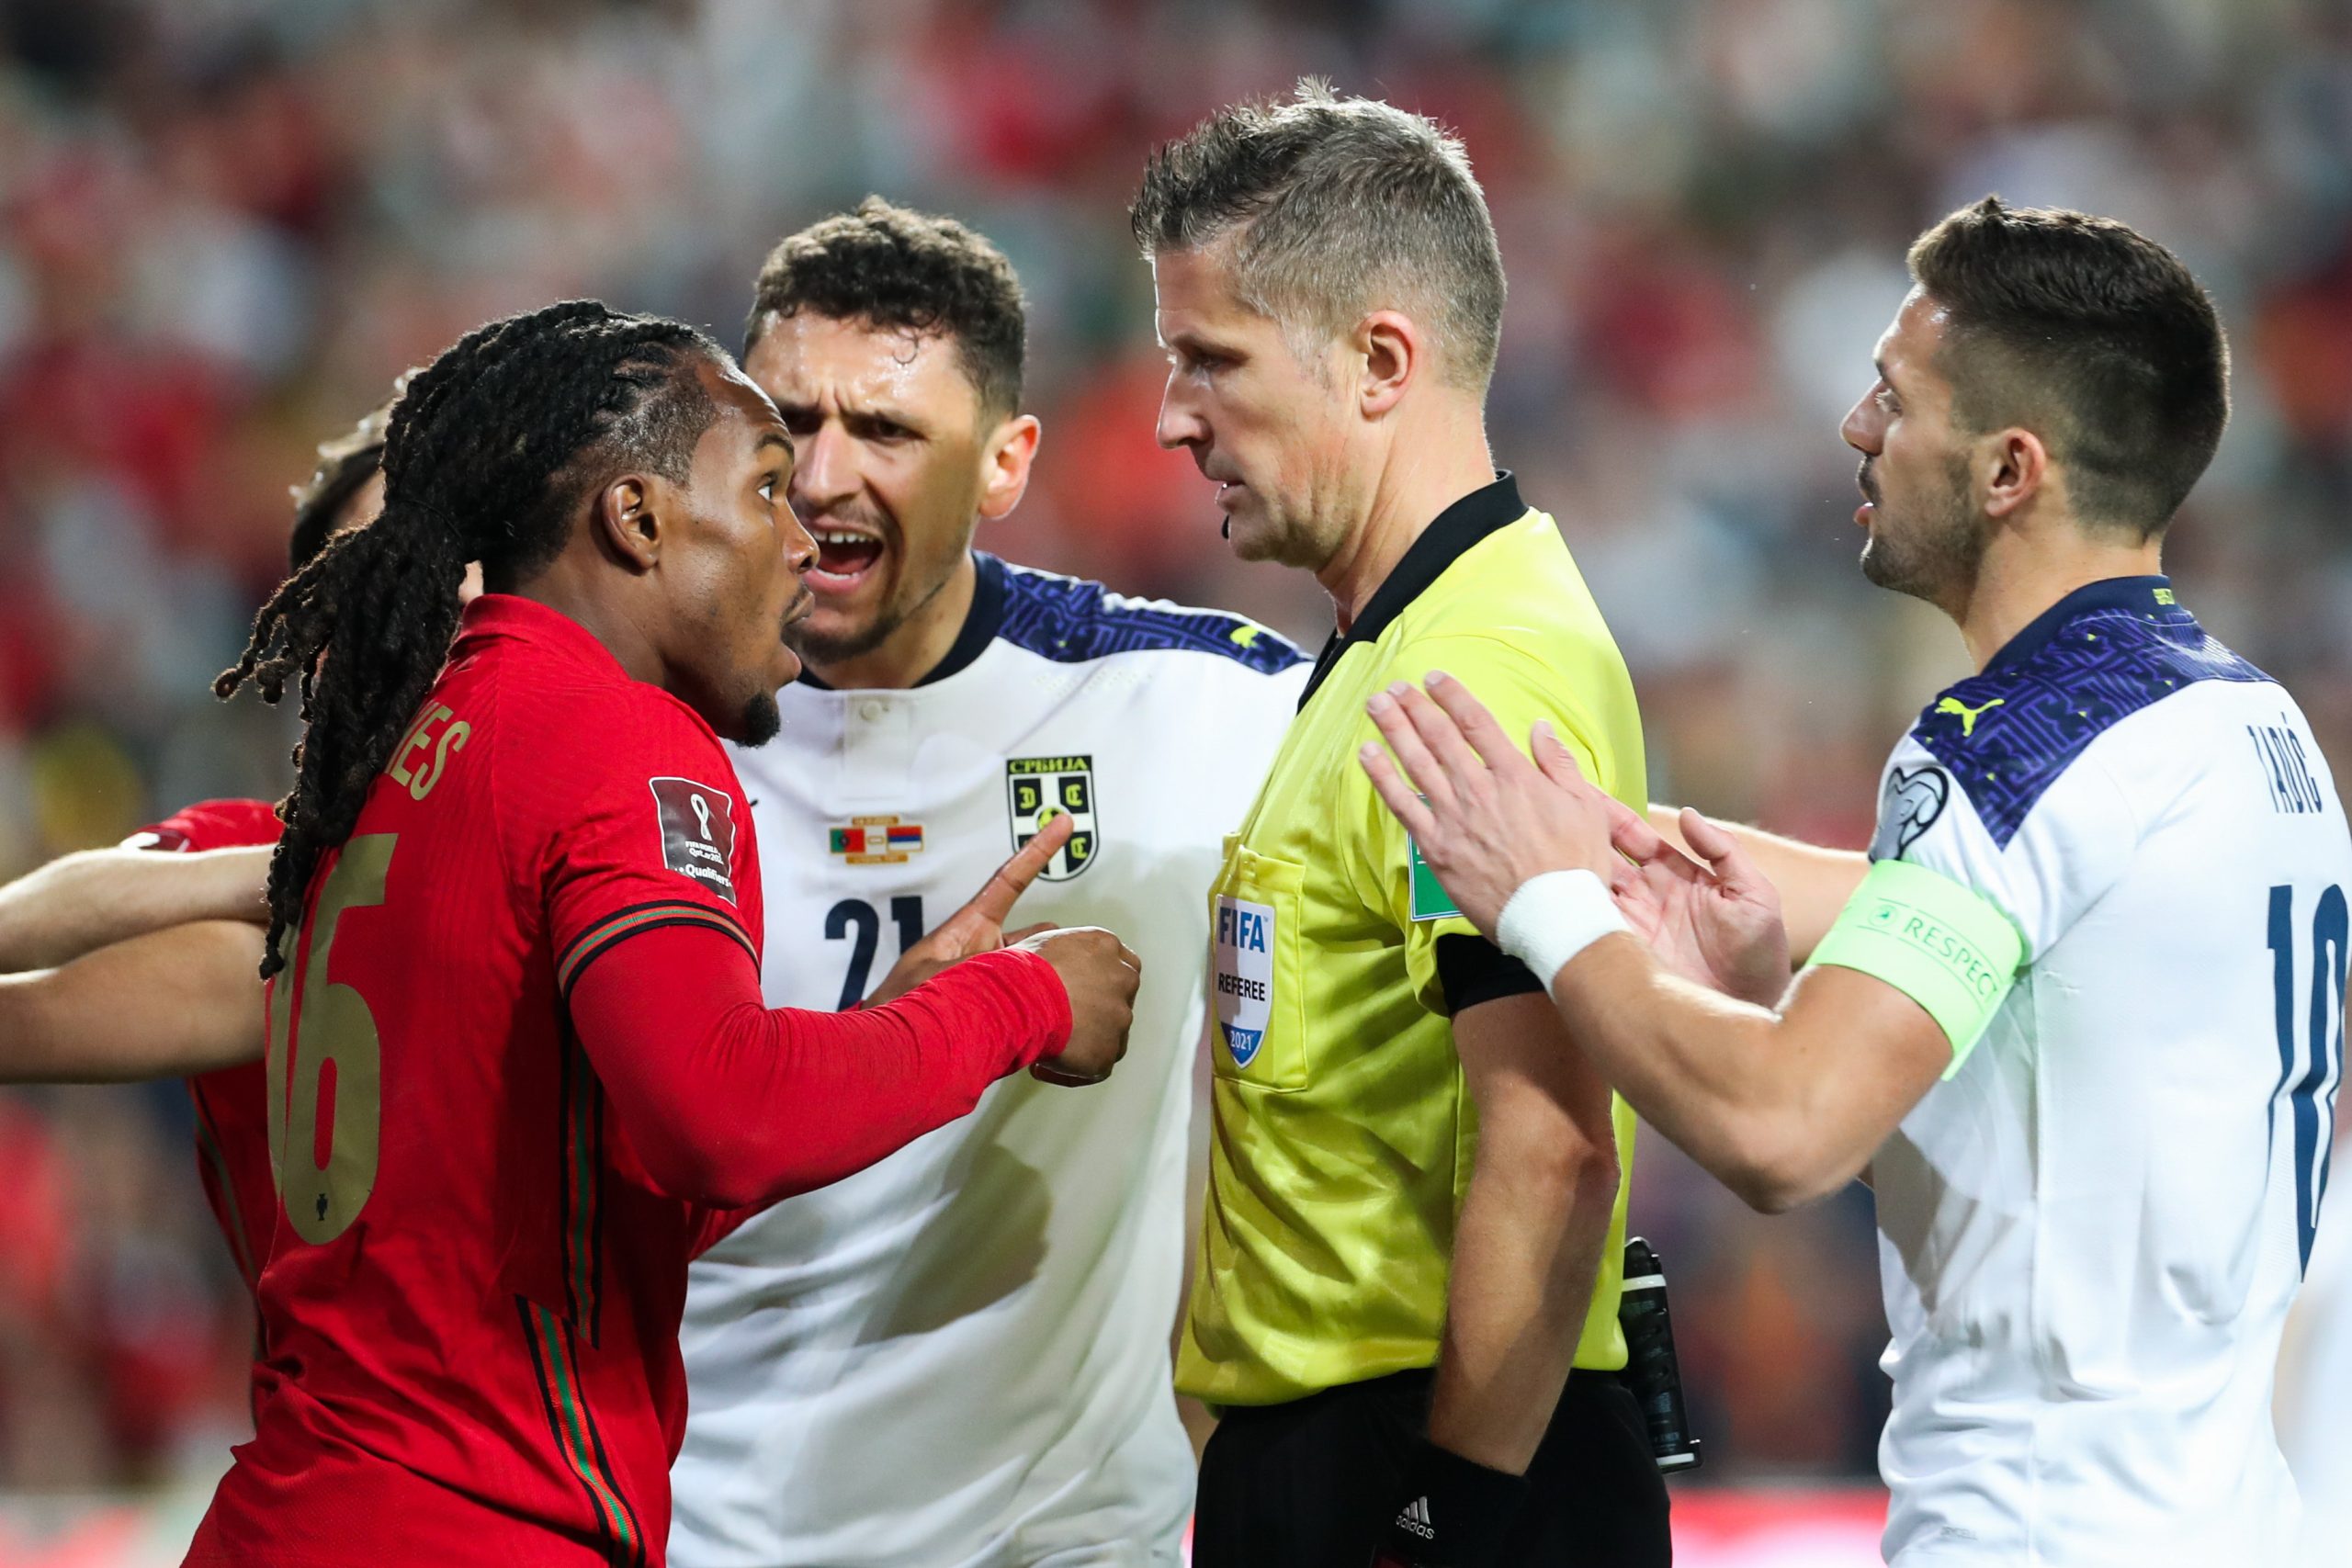 epa09582429 Portugal's player Renato Sanches (L) talks to the Italian referee Daniele Orsato (C) during the FIFA World Cup 2022 qualifying group A soccer match against Serbia at Luz Stadium in Lisbon, Portugal, 14 November 2021.  EPA/ANTONIO COTRIM